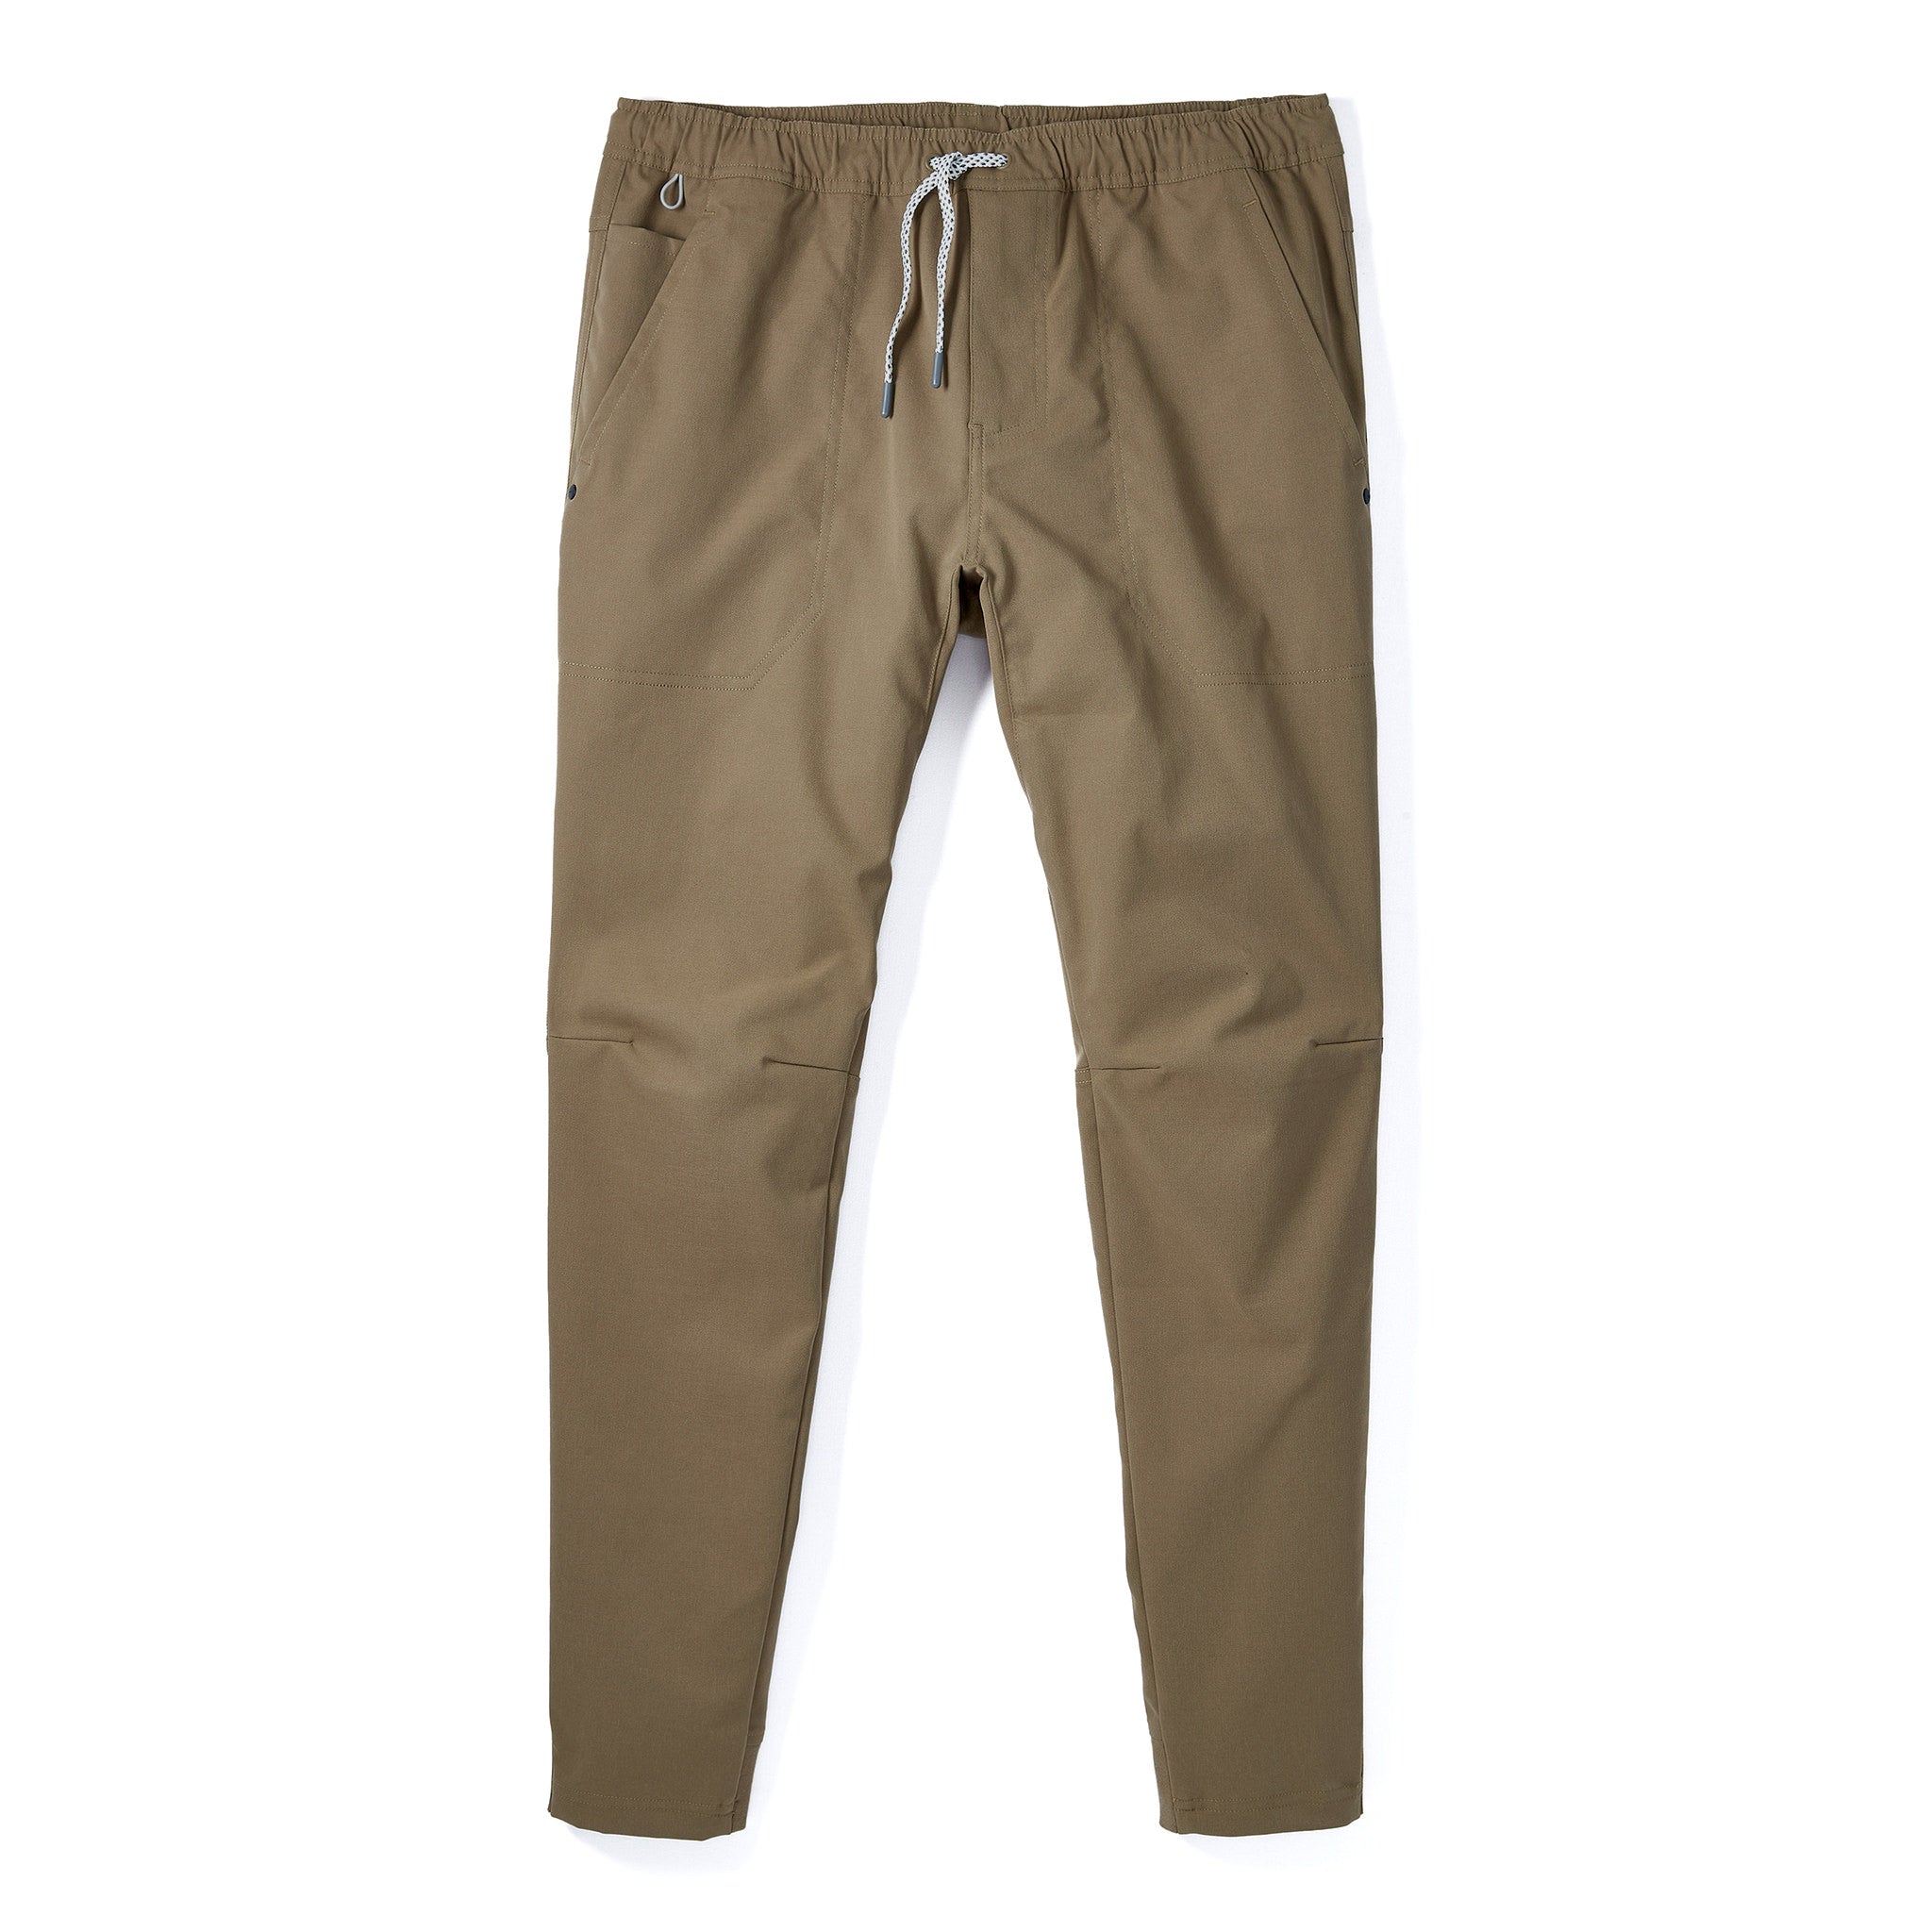 Tour Jogger in Olive Khaki, Travel and Work Pants